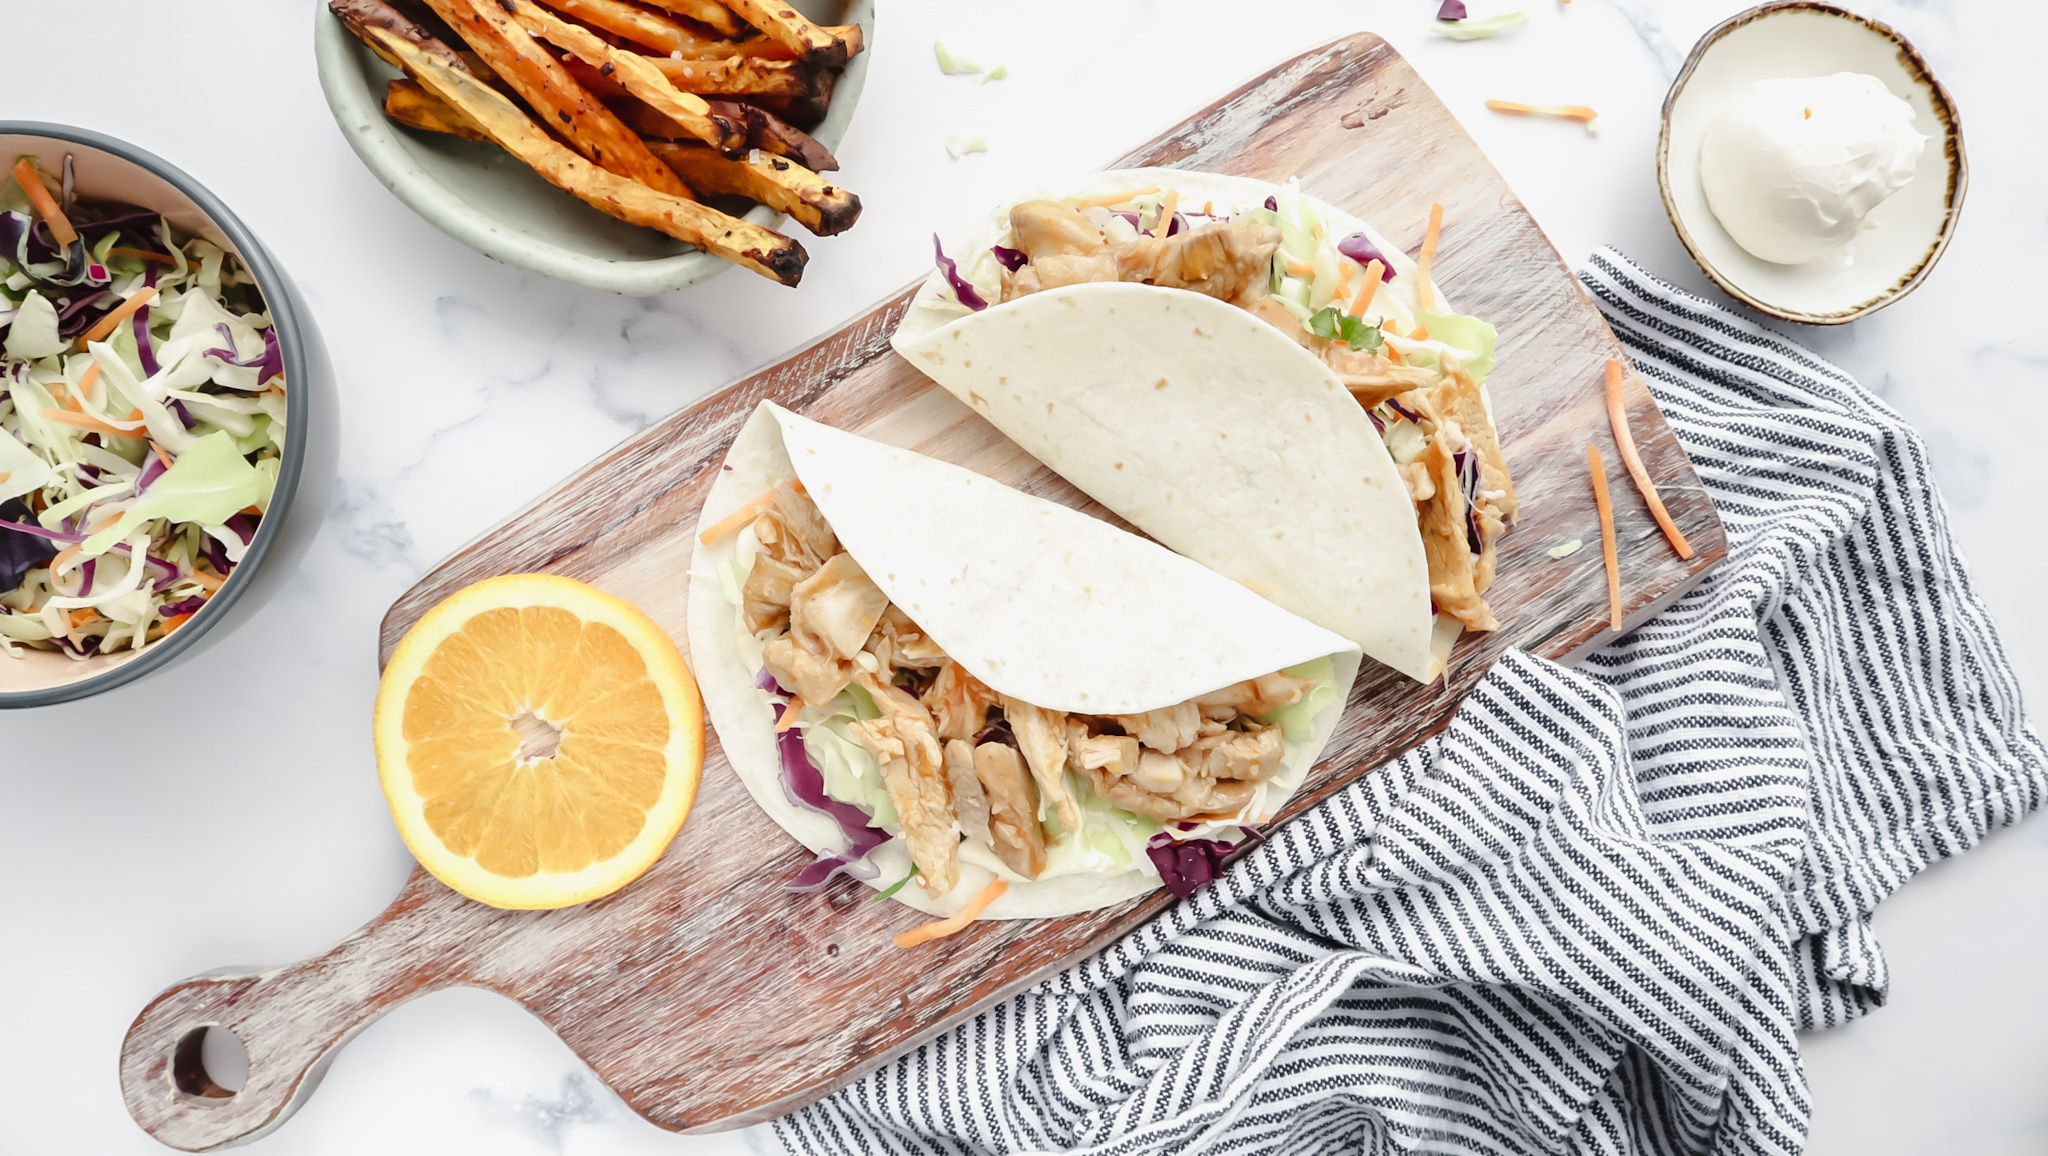 Barbecue pulled pork tacos with slaw & sweet potato chips - Inbox Dinners